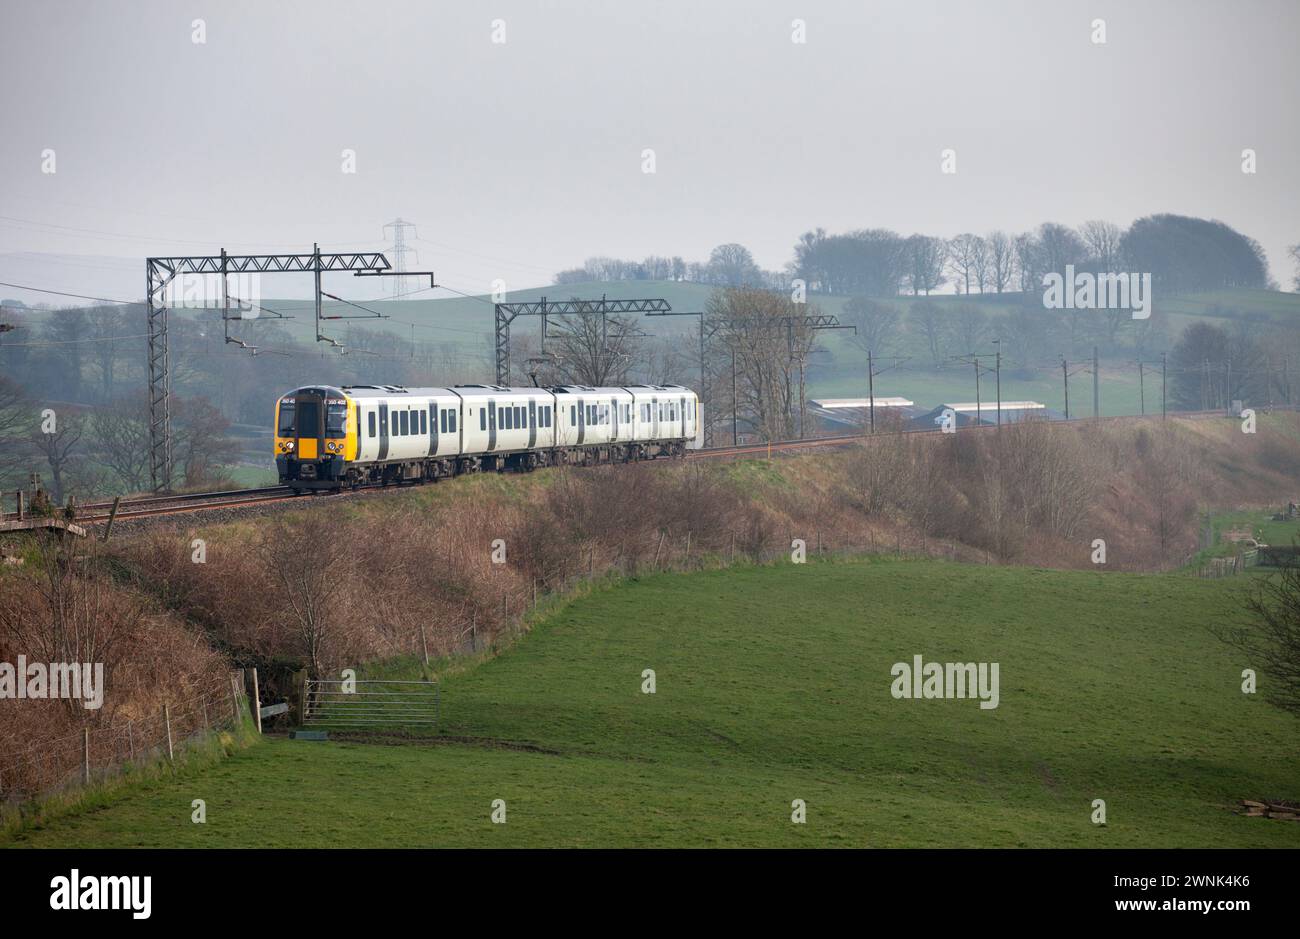 A First Transpennine Express class 350 electric train on the west coast main line Stock Photo